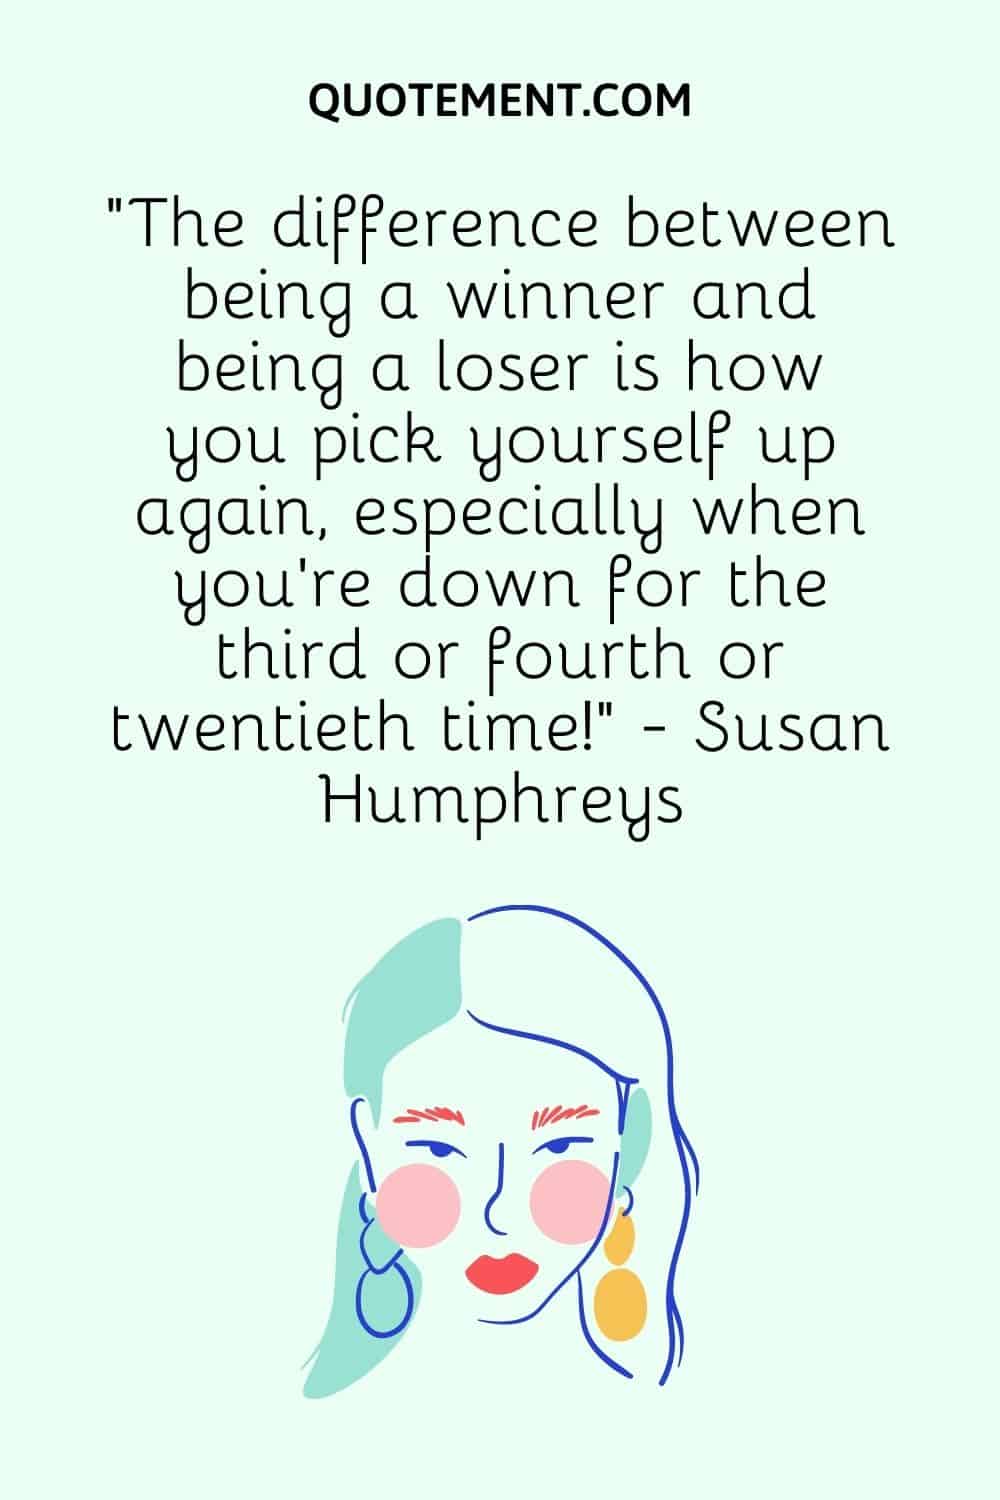 “The difference between being a winner and being a loser is how you pick yourself up again, especially when you're down for the third or fourth or twentieth time!” - Susan Humphreys